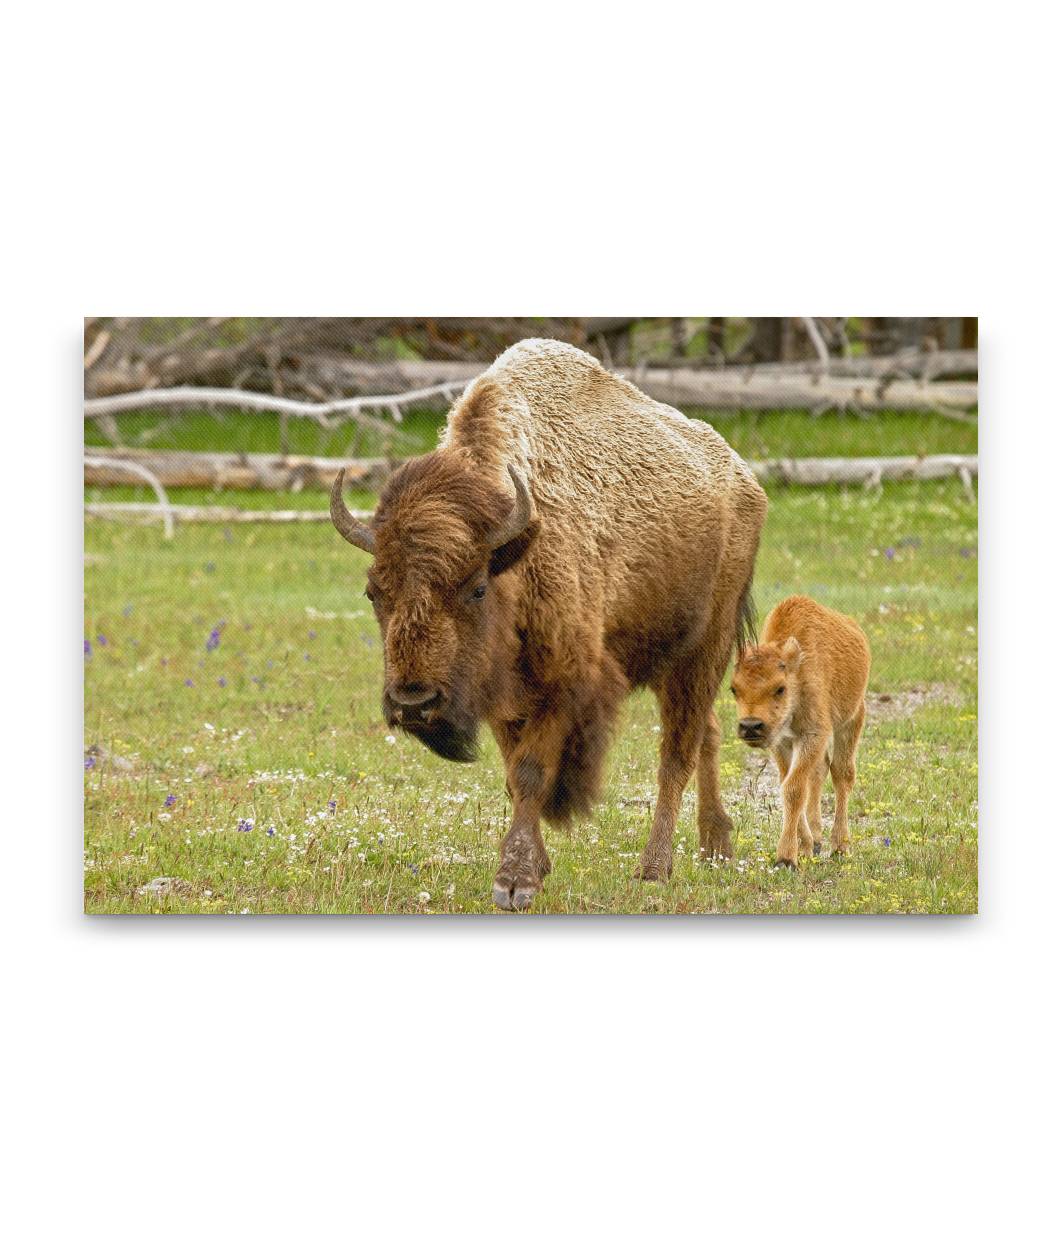 American Bison, Yellowstone National Park, Wyoming